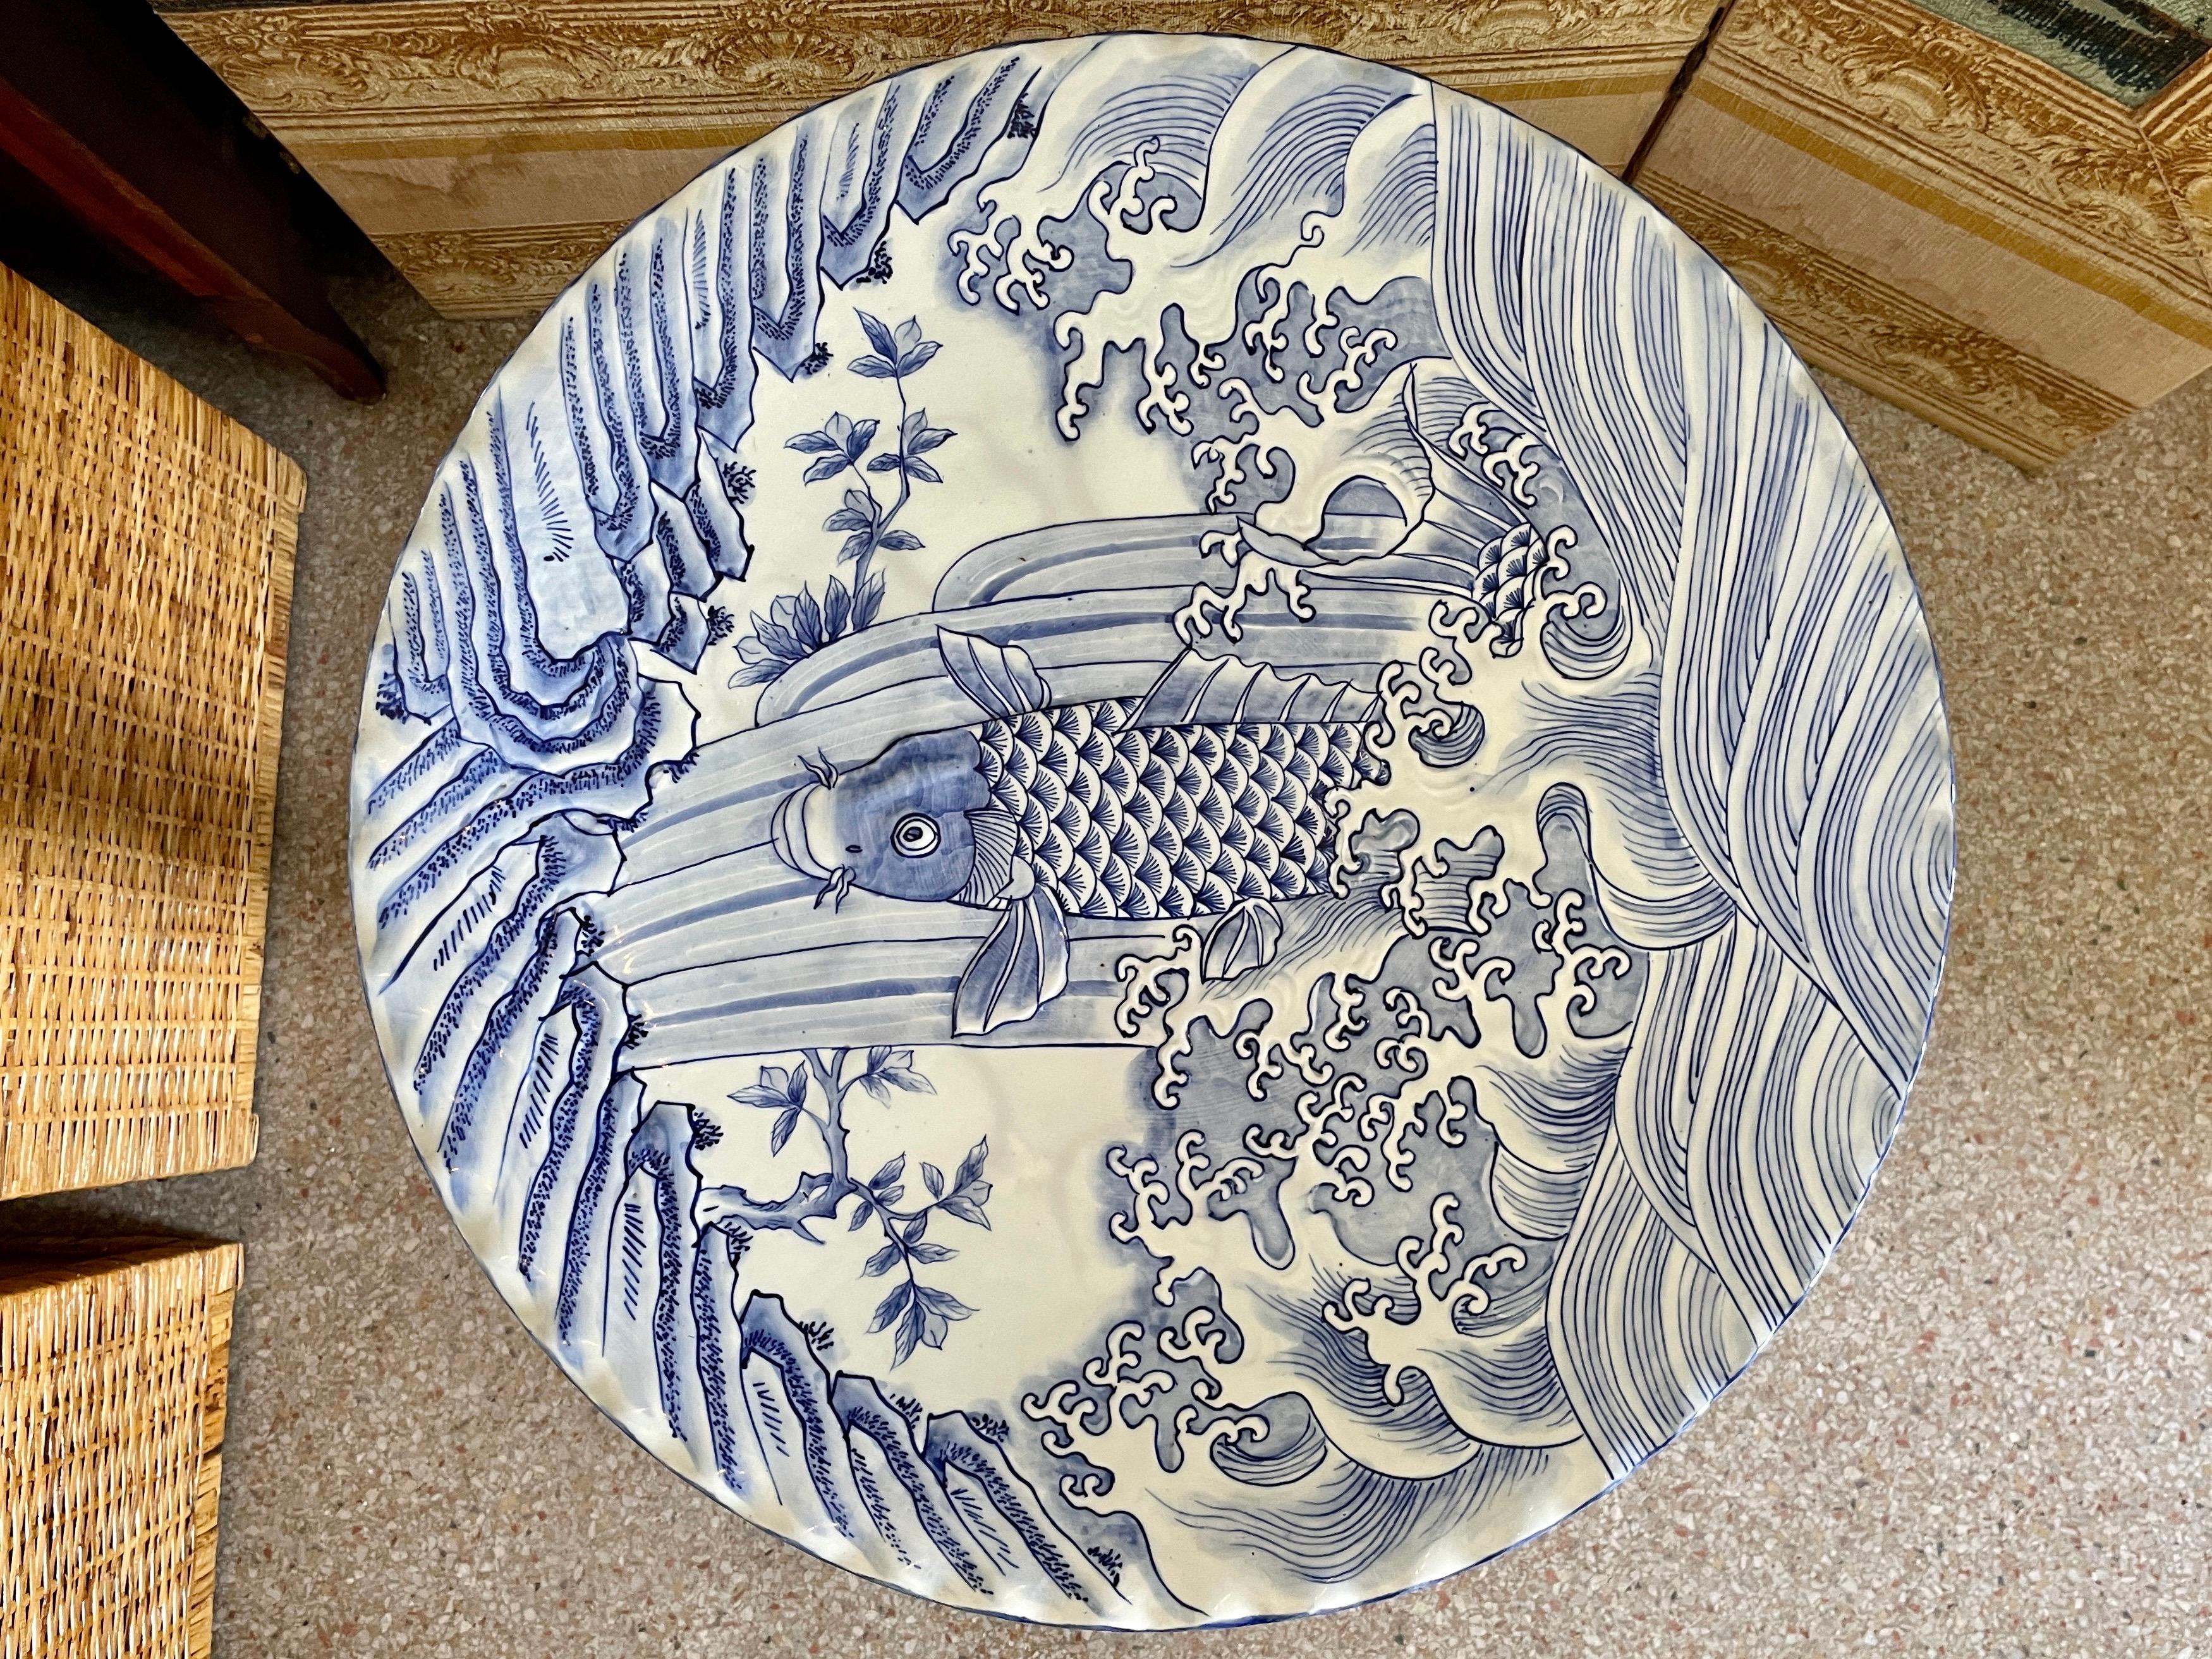 Lovely Japanese large ceramic serving platter with Blue and White fish and sea drawings. Could be a great decorative platter for your interiors and parties. Very rare size and scale.